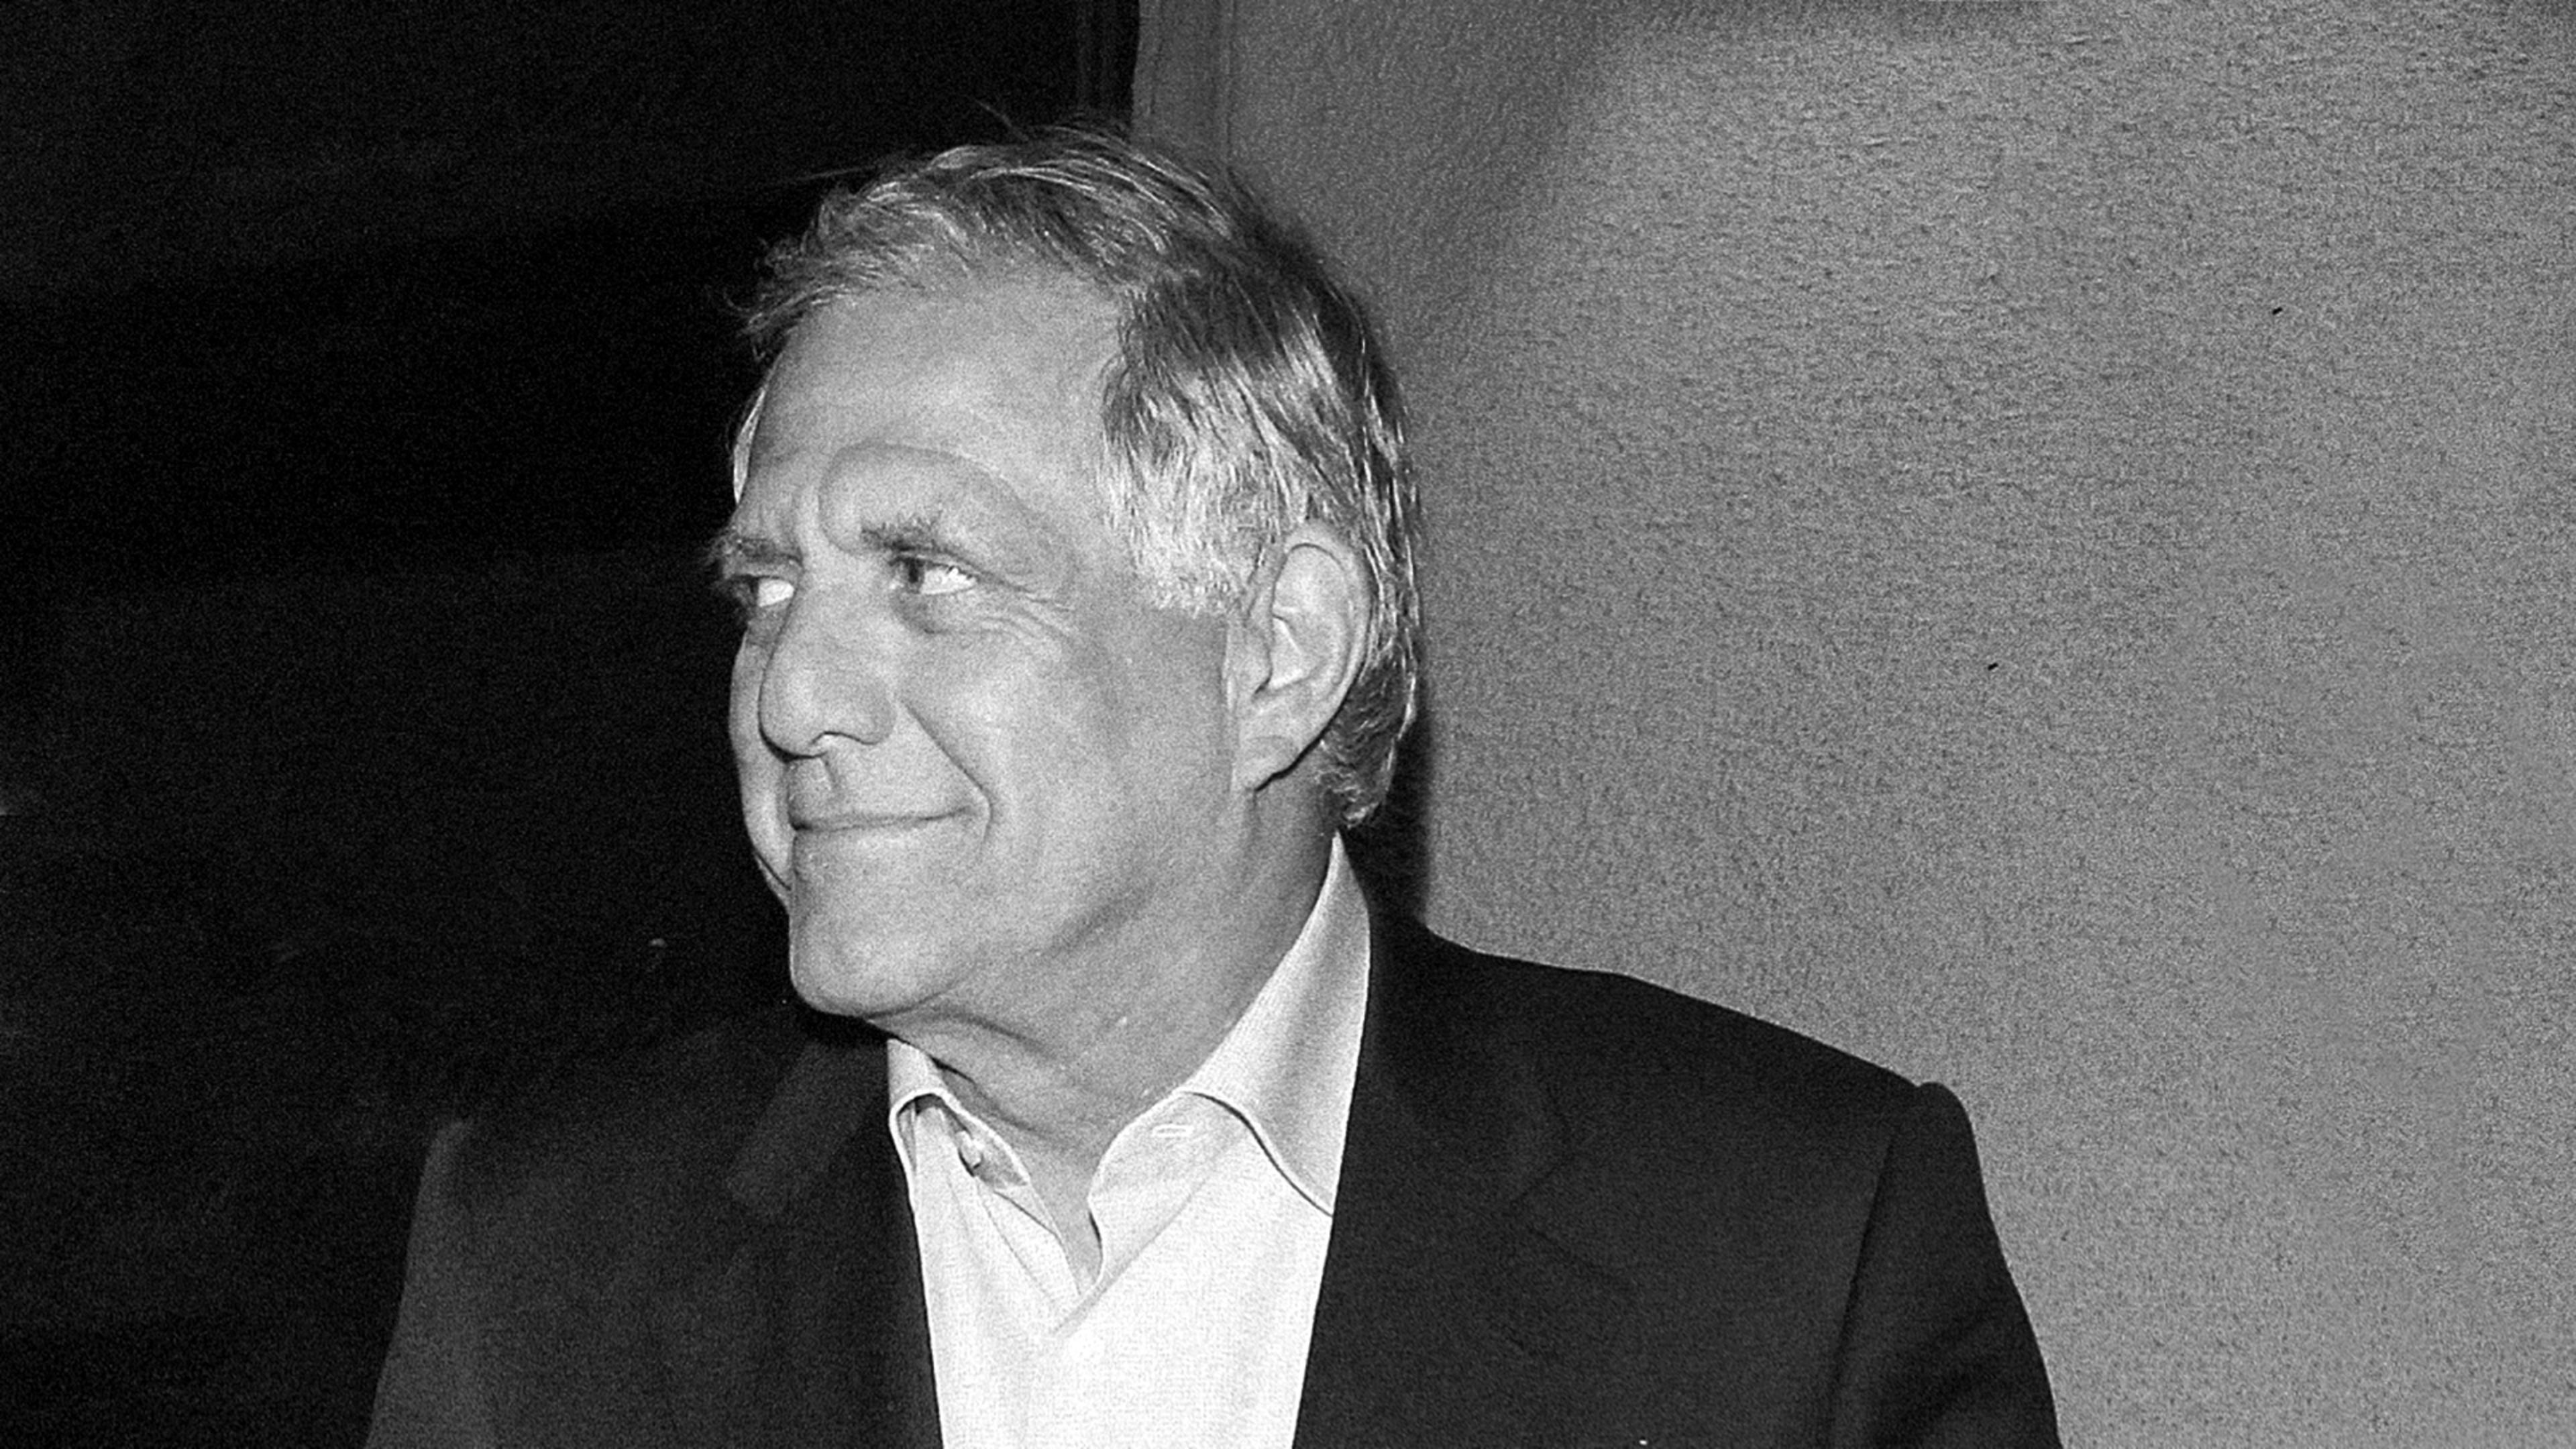 Les Moonves and the conflicted moment of Hollywood’s #MeToo movement